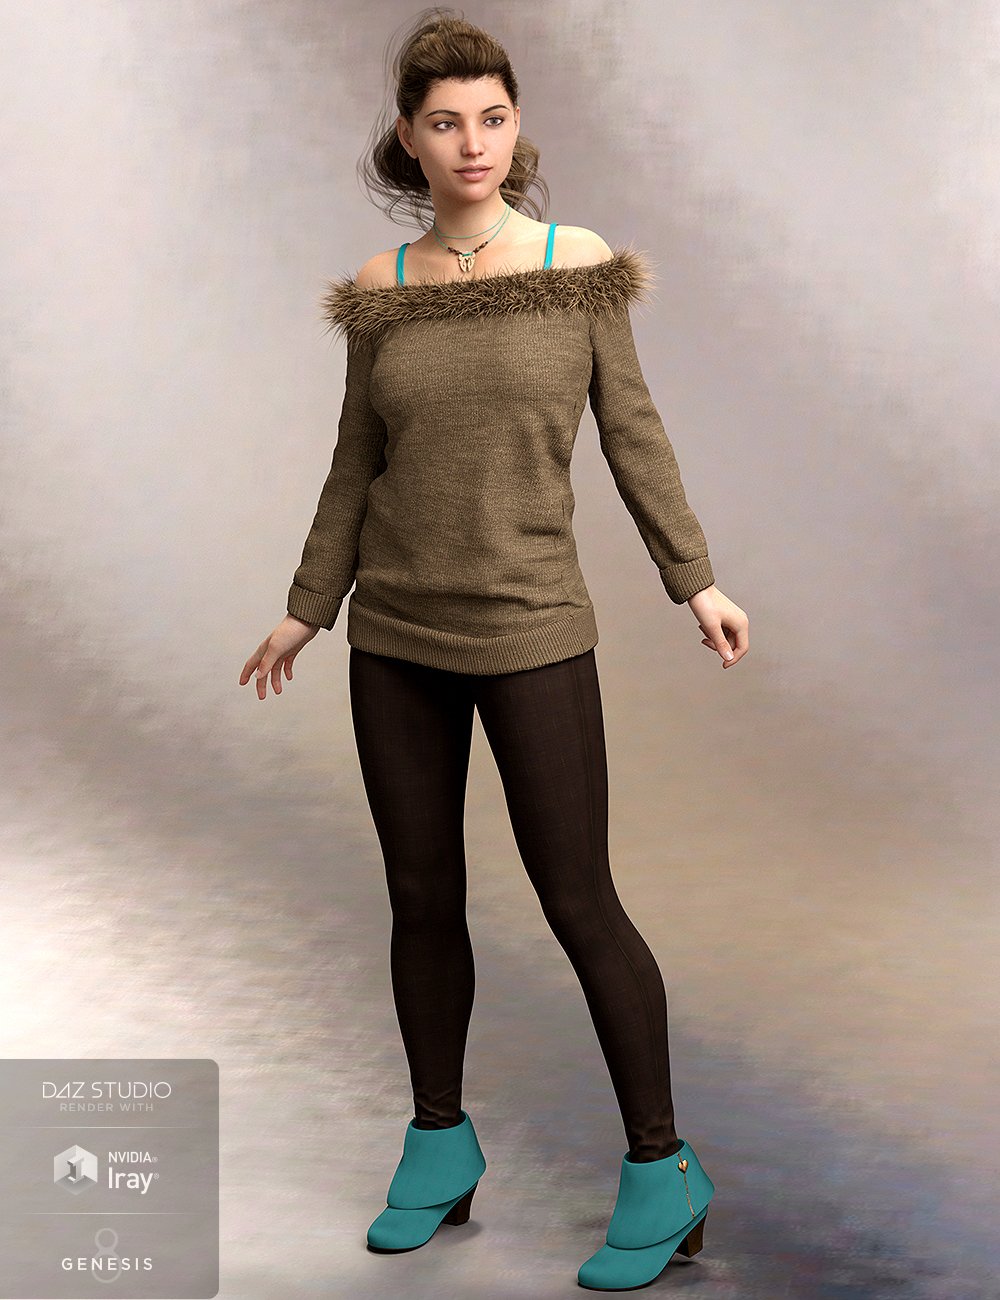 Cozy Sweater Outfit for Genesis 8 Female(s) by: Ryverthorn, 3D Models by Daz 3D